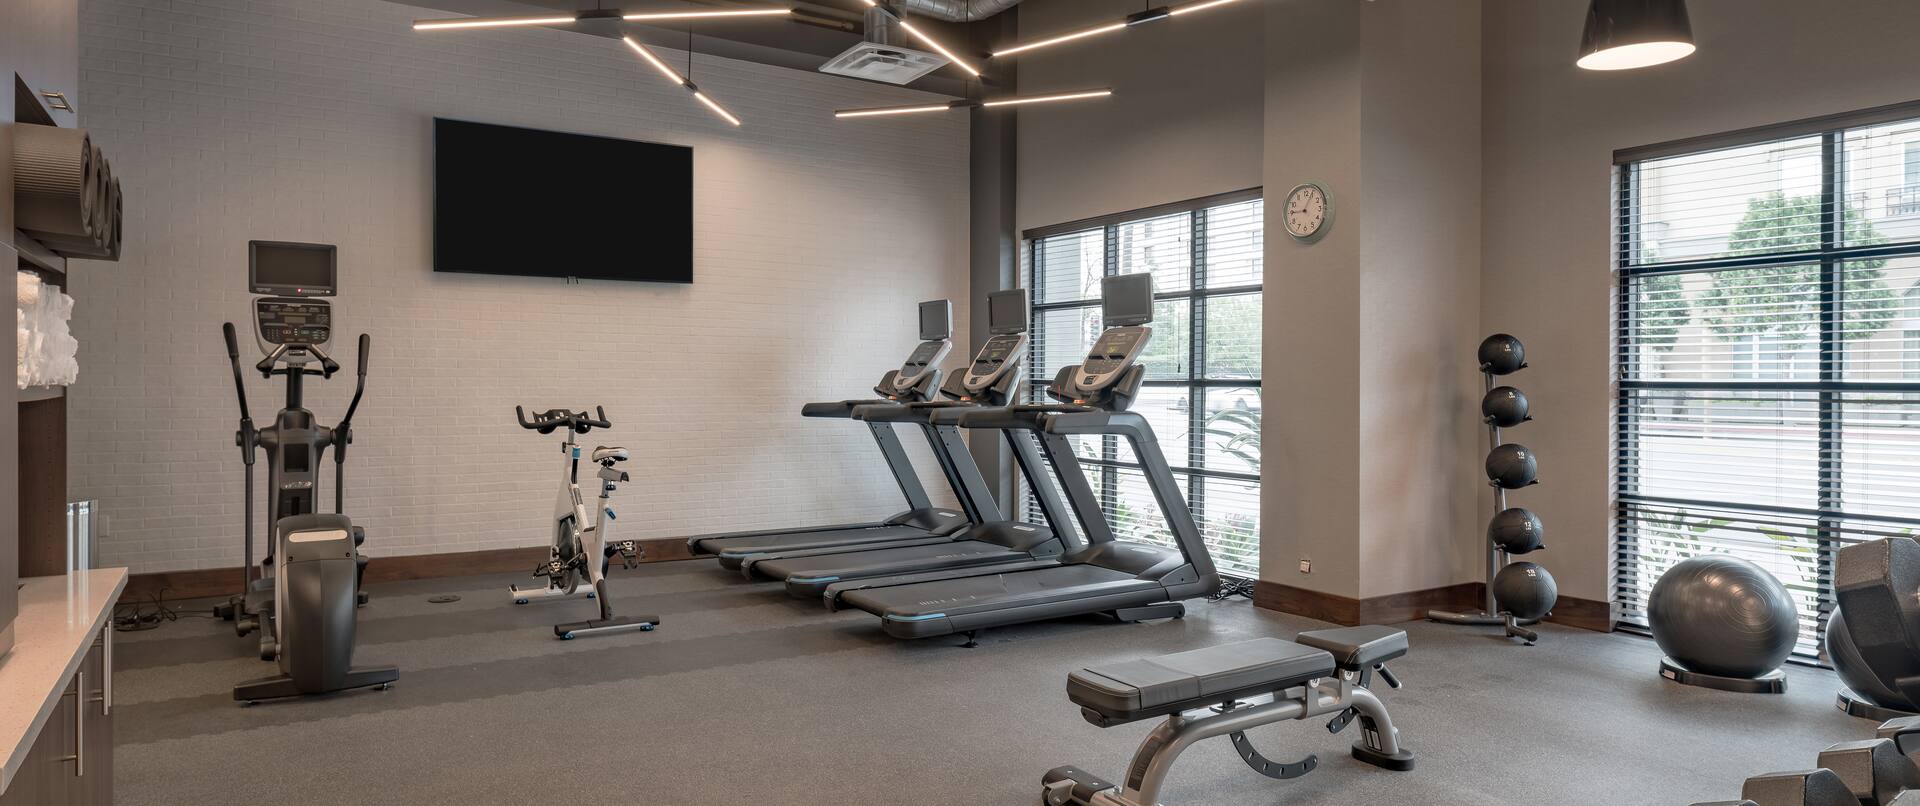 Fitness Center with Treadmills, Weight Bench, Cross-Trainer and Wall Mounted TV